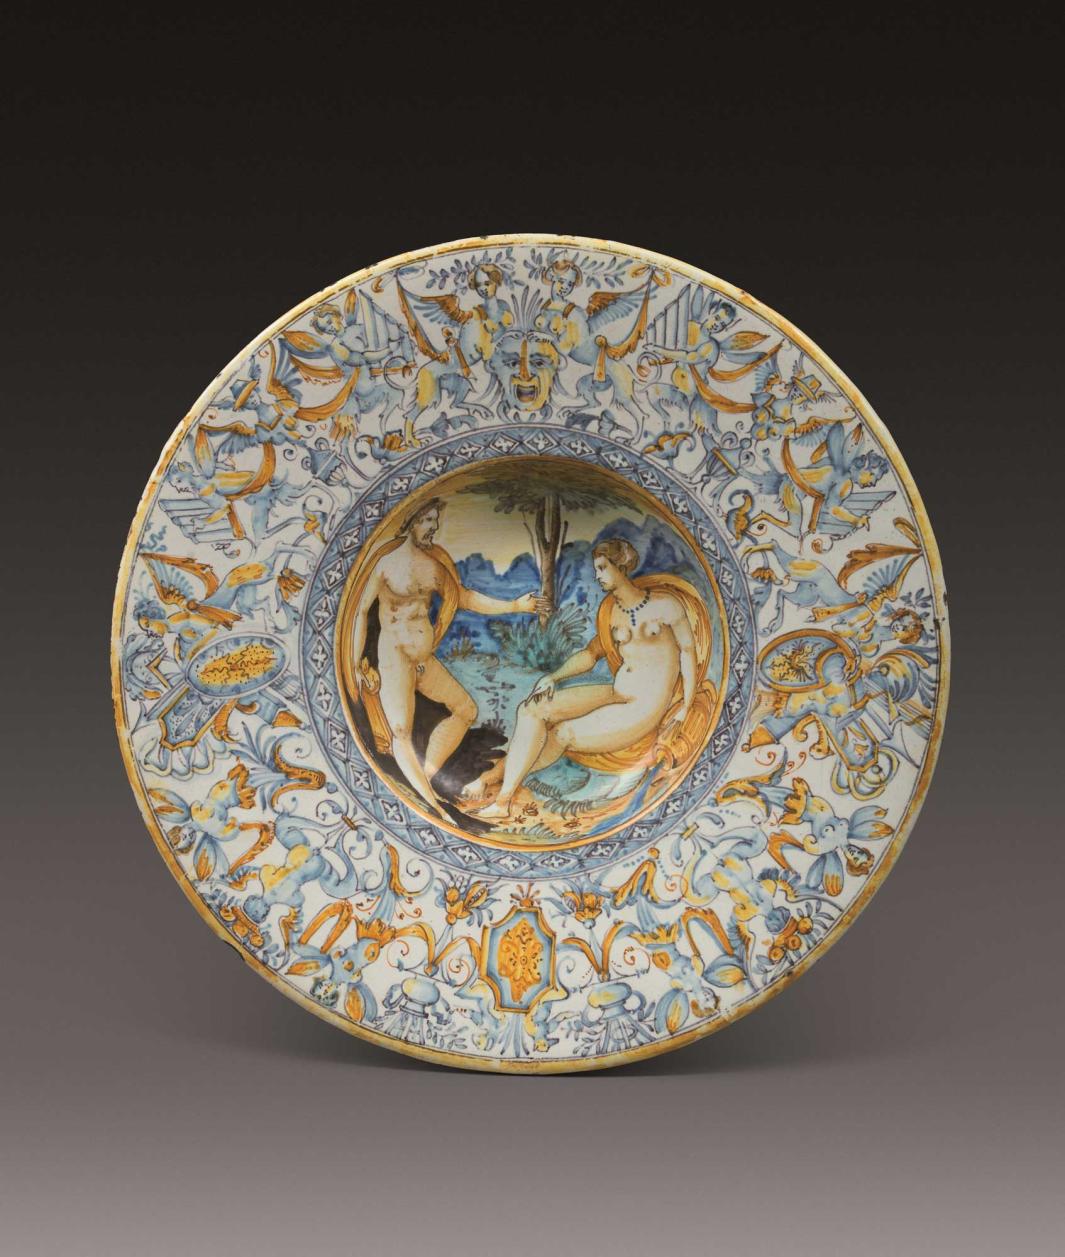 Earthenware plate with two nude figures talking in the center, surrounded by a design of half-human, half-animal figures on the outside. 